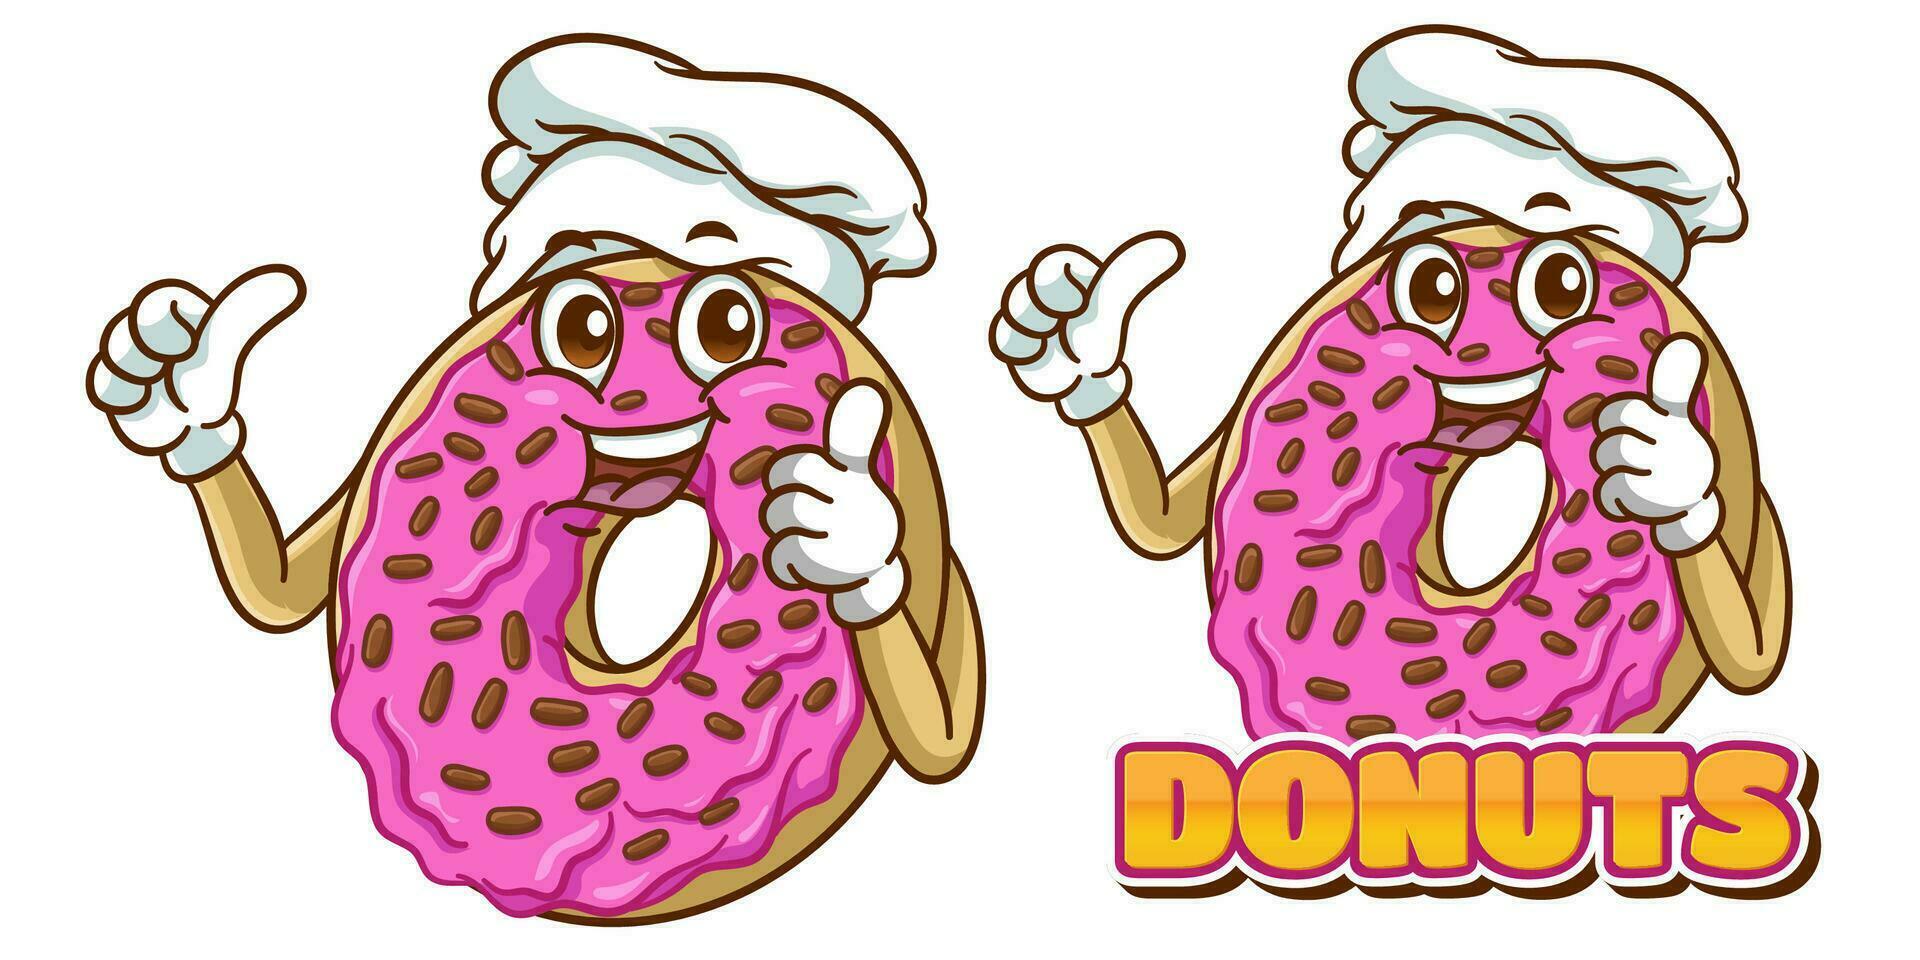 donuts logo template, with funny character donuts vector